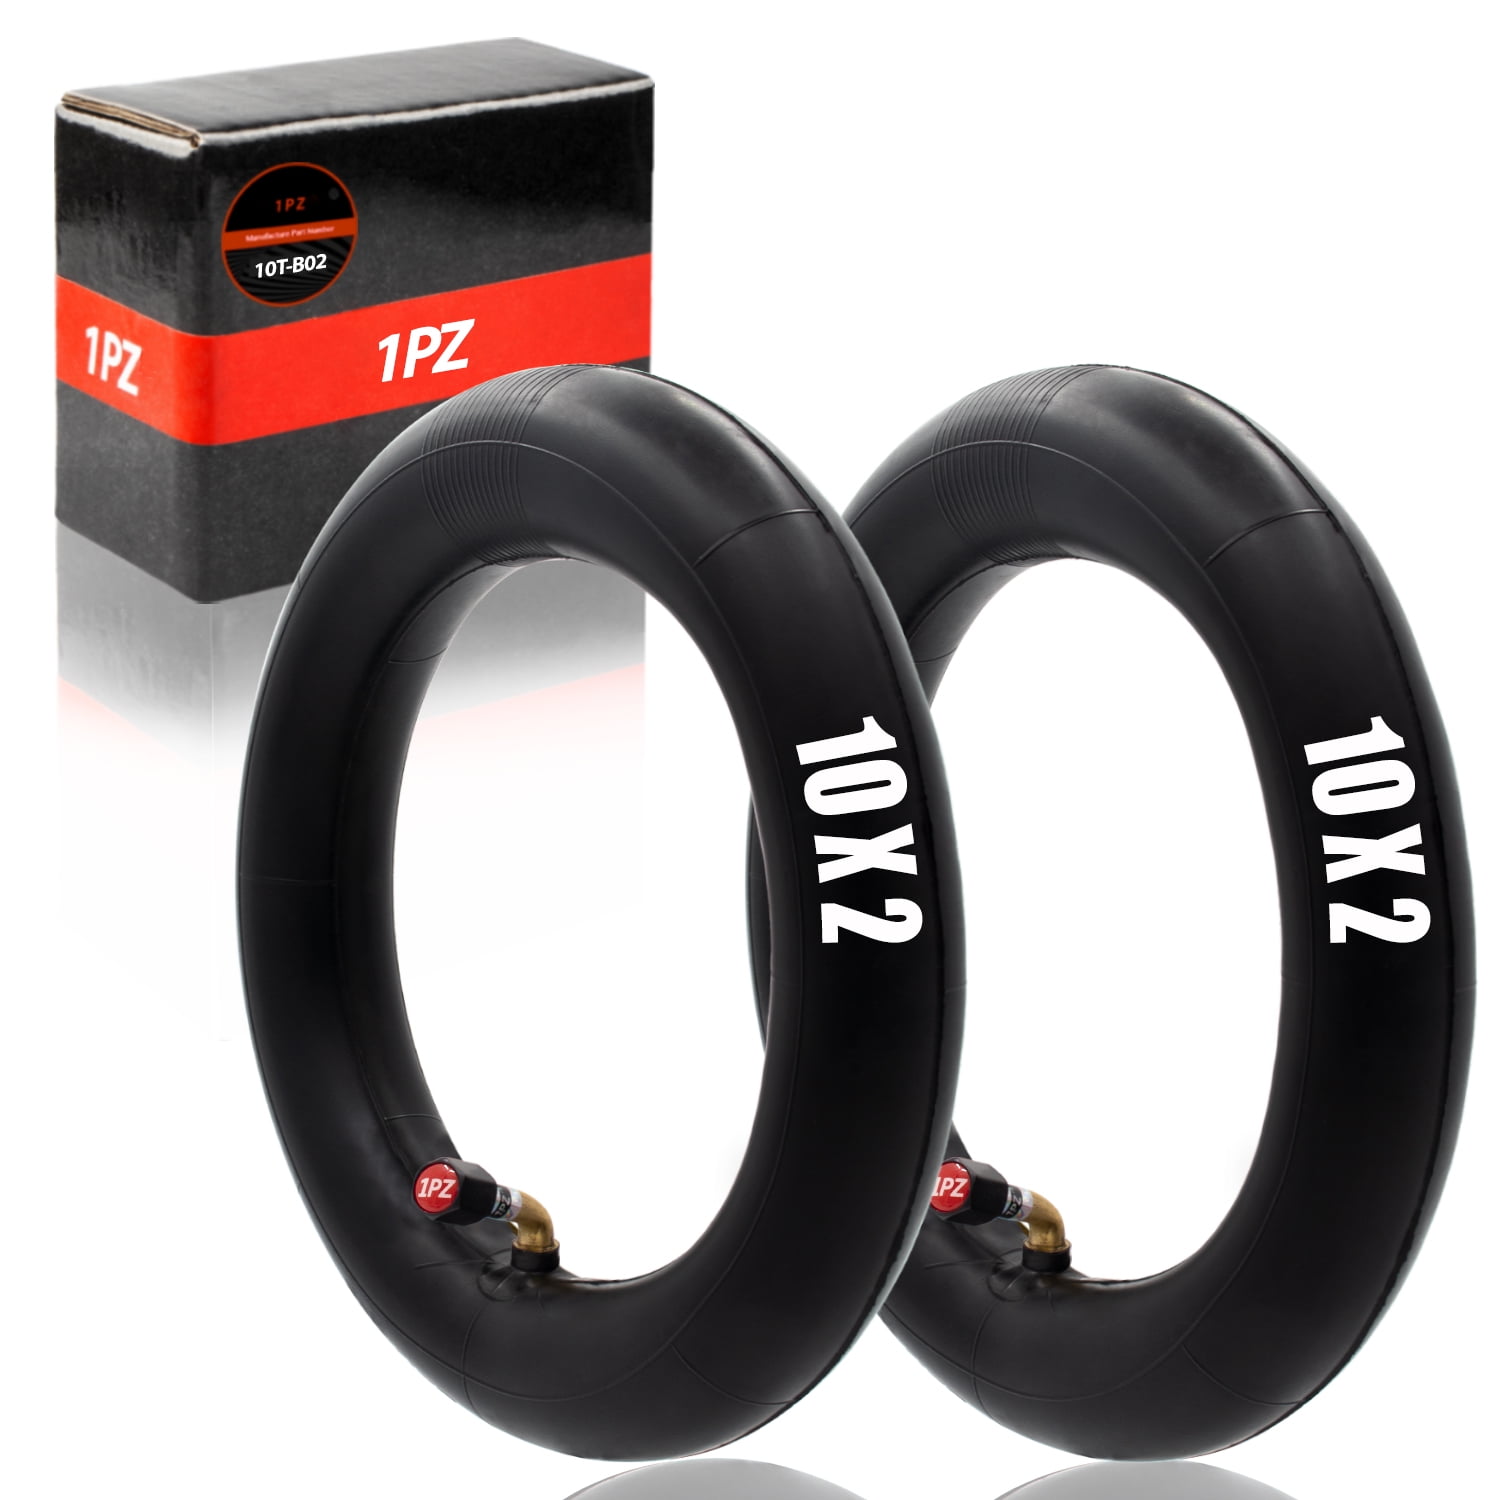 10 Inch for self Balancing 2-Wheel Scooter 2 Pack of Wingsmoto Inner Tube 10 x 2.125 